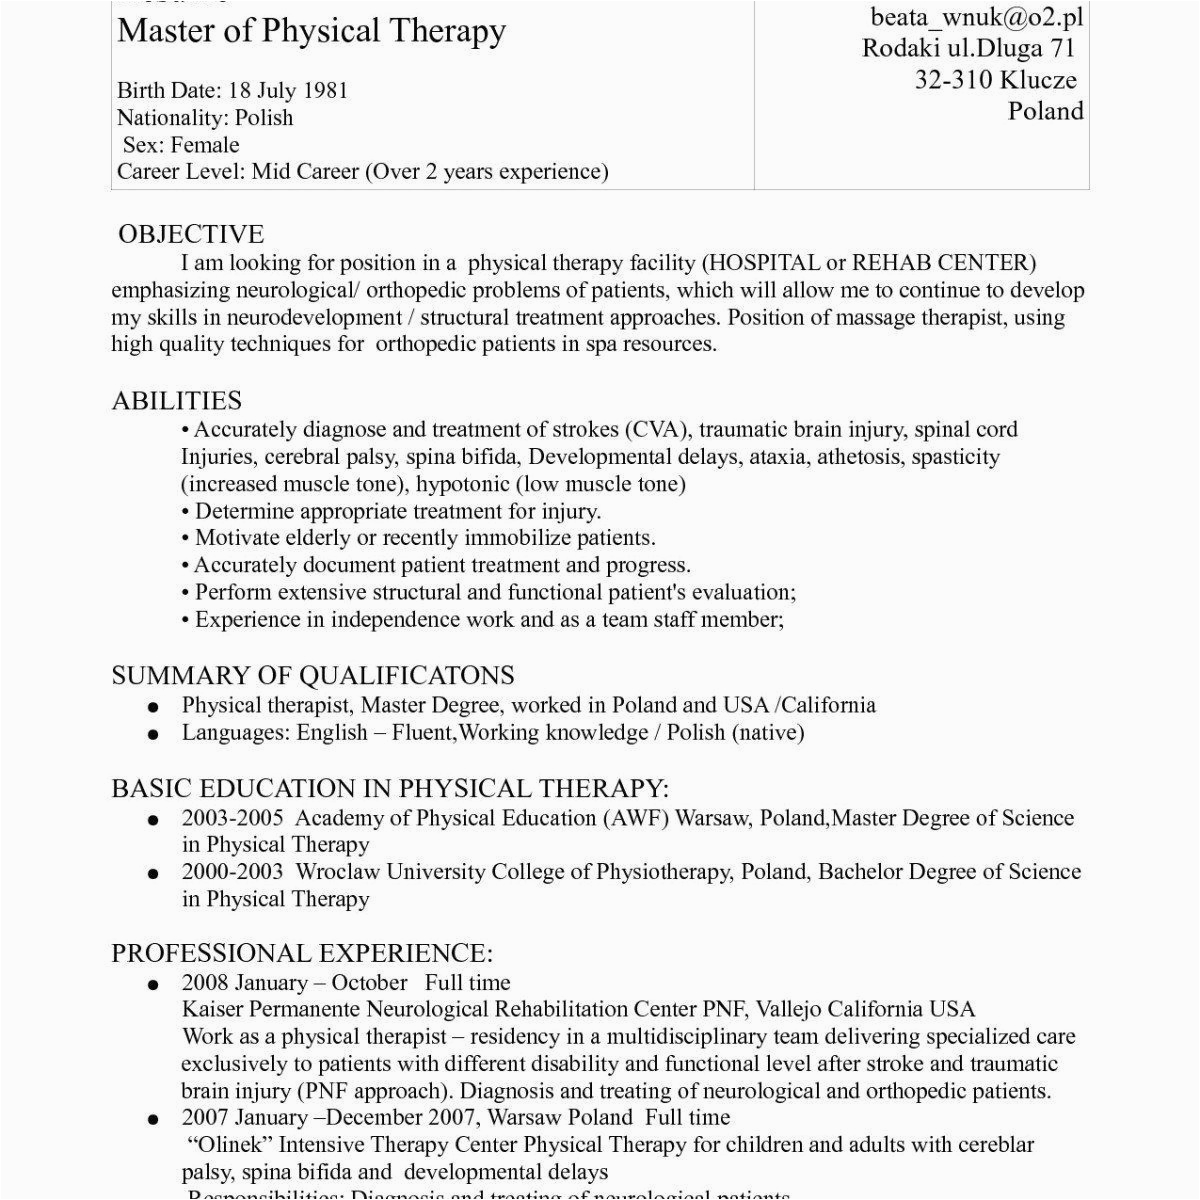 Sample Resume with Bachelors and Masters Degrees How Do I Write Bachelor S Degree A Resume Resmud